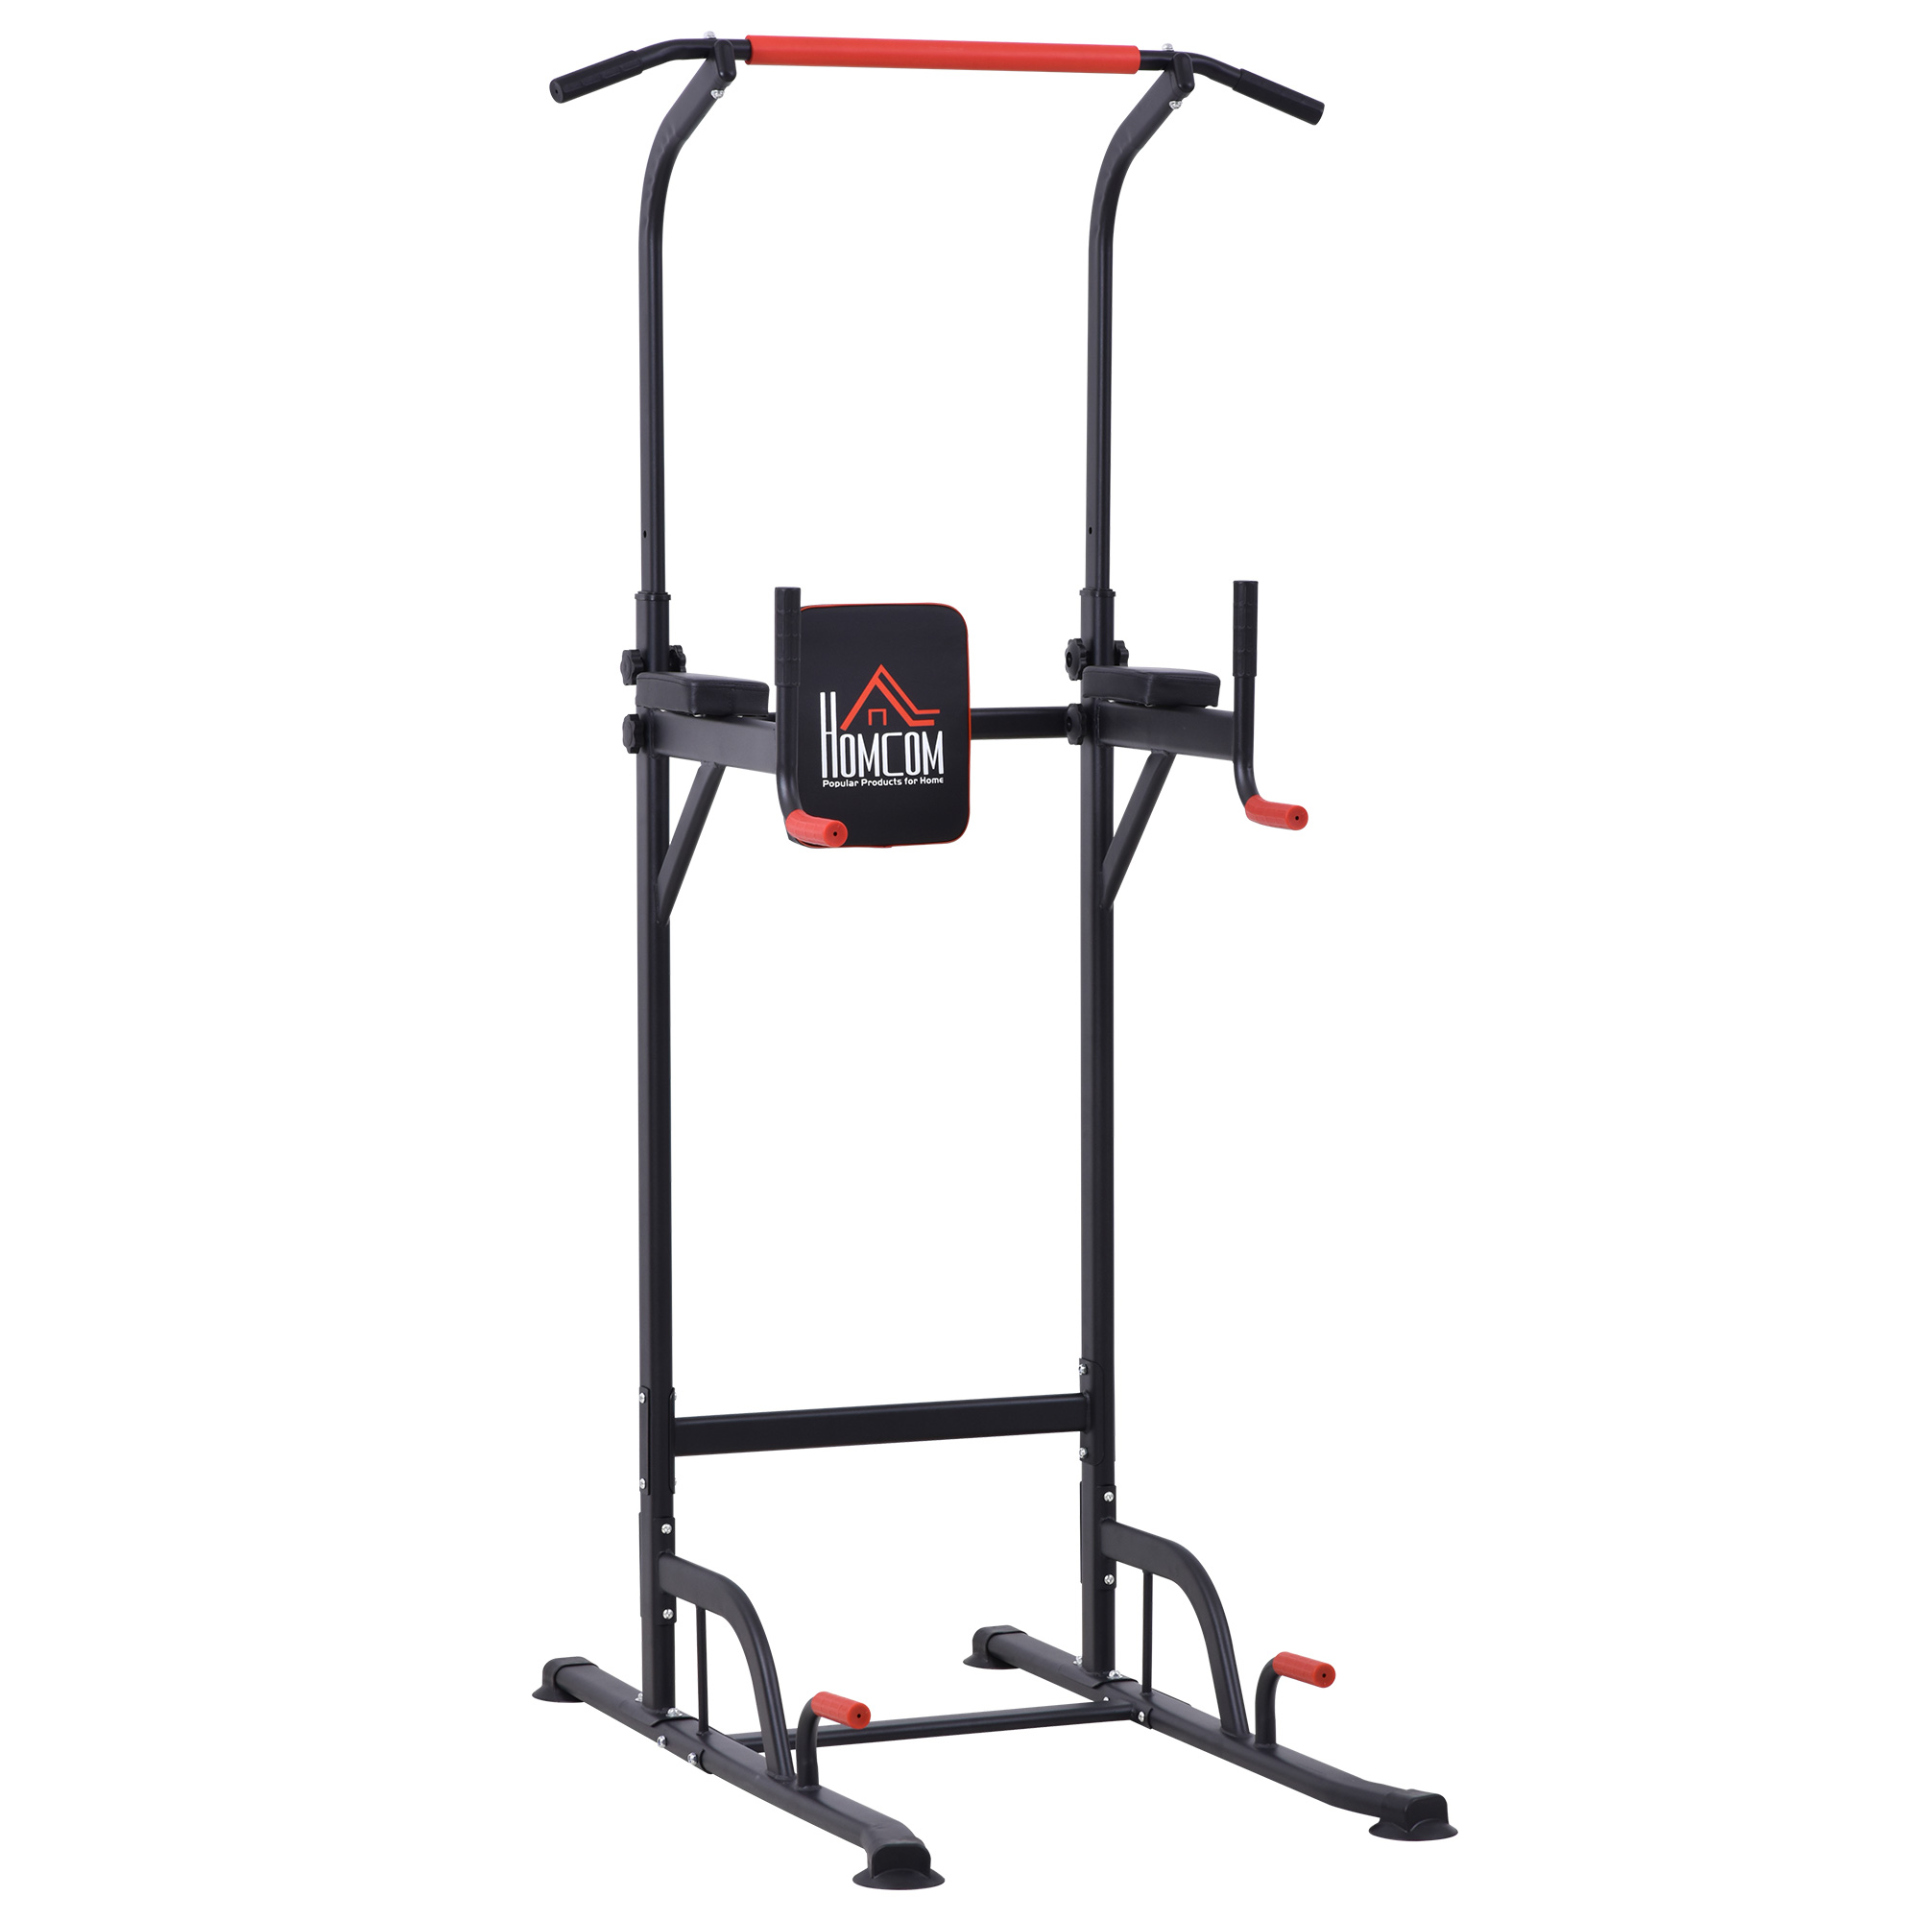 HOMCOM Power Tower Station Pull Up Bar for Home Office Gym Training Workout Equi